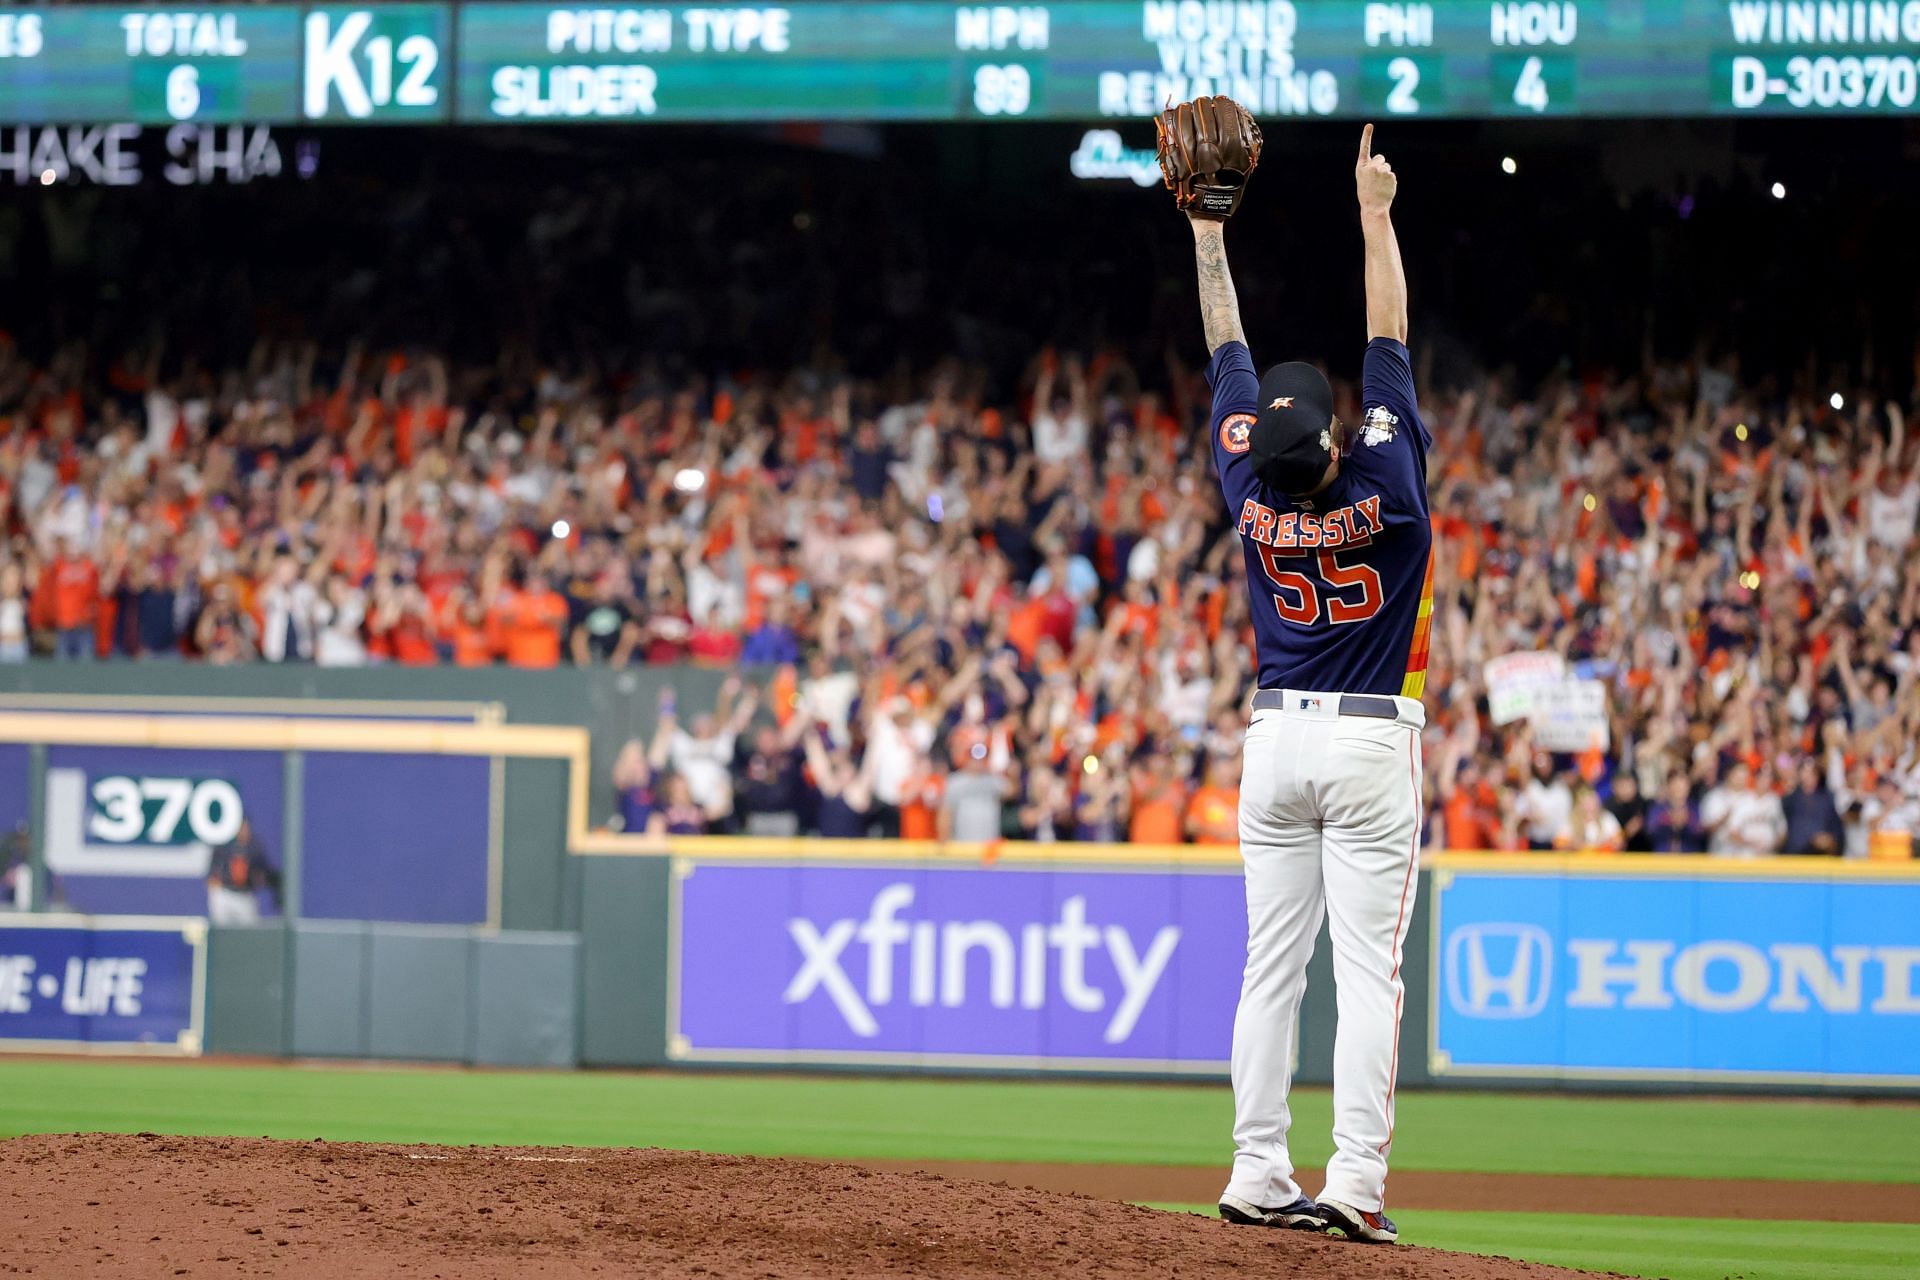 World Series 2022: Houston Astros win first title-clinching home